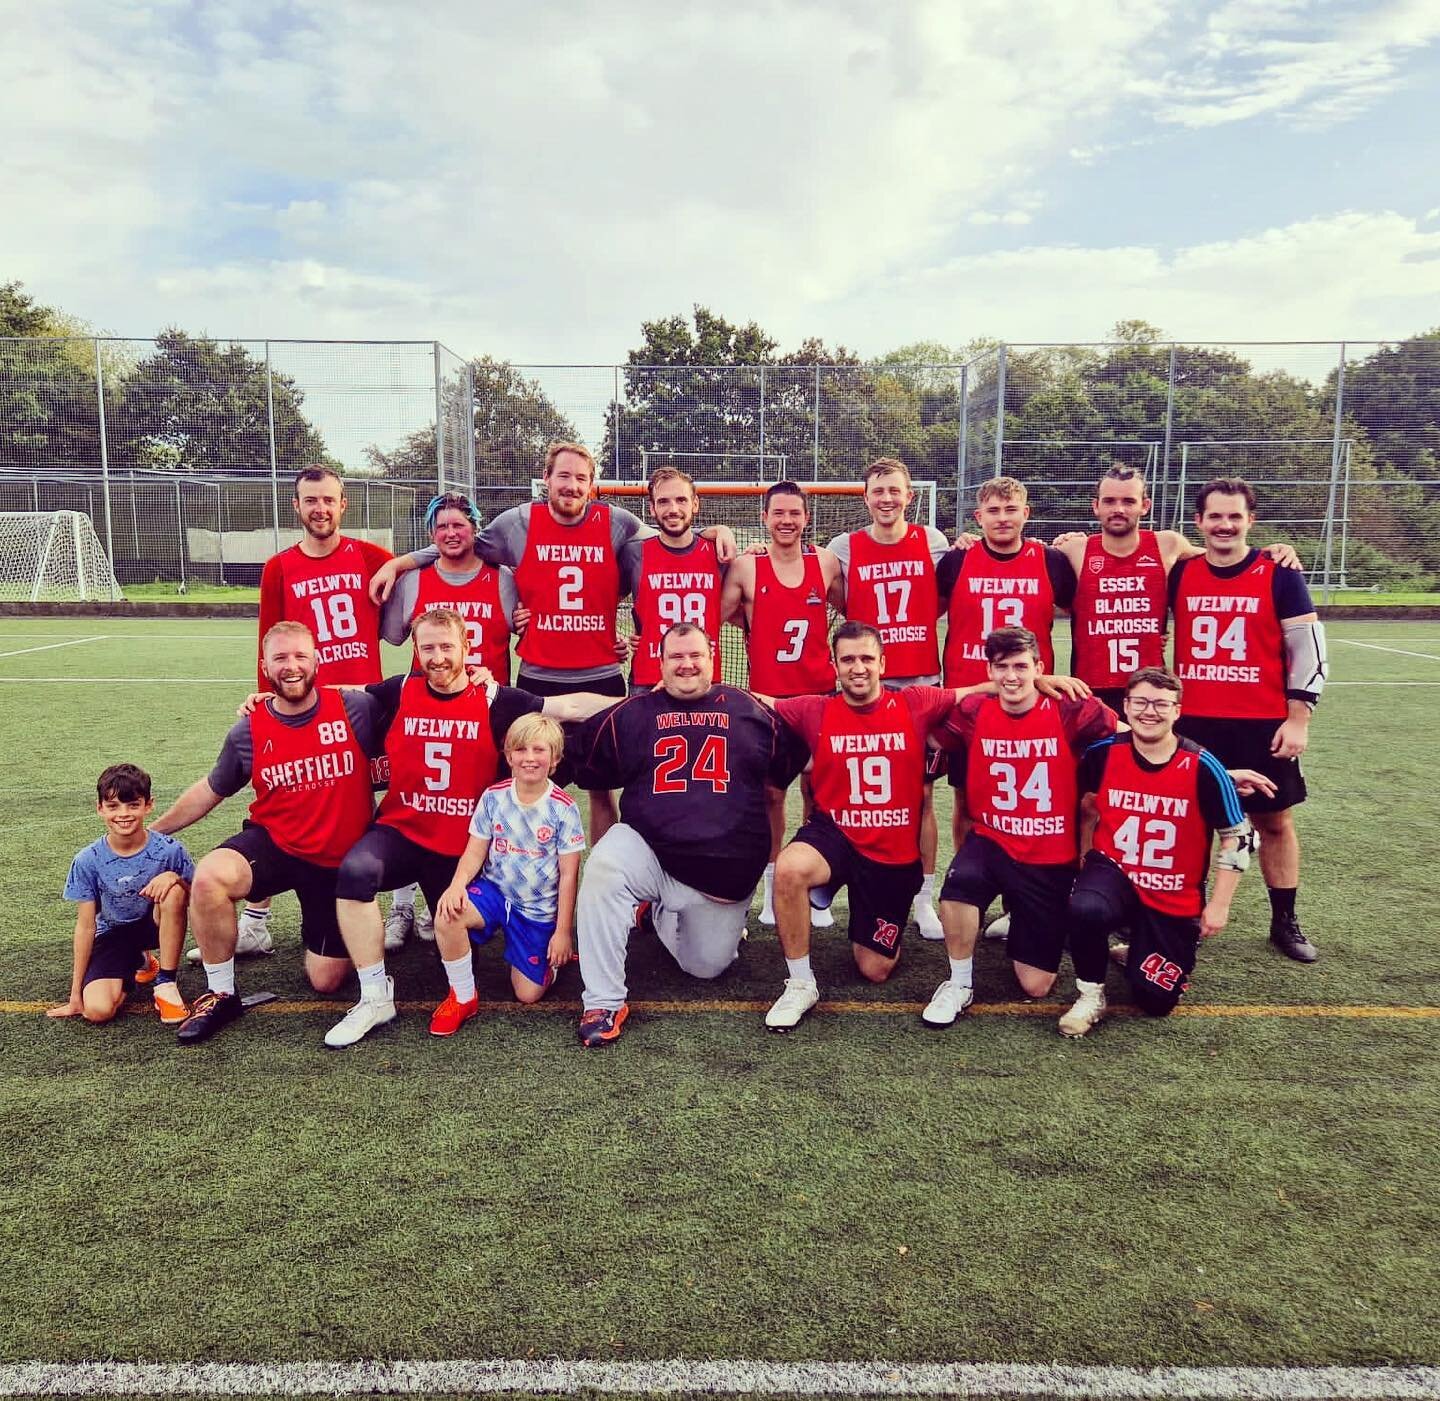 A great game on the weekend saw the team come home with an 8-6 win, coming back from 6-2 down! @eastgrinsteadlacrosseclub thanks for the the hospitality and the game! #welwyn #welwynwarriors #Welwynlacrosse #lacrosse